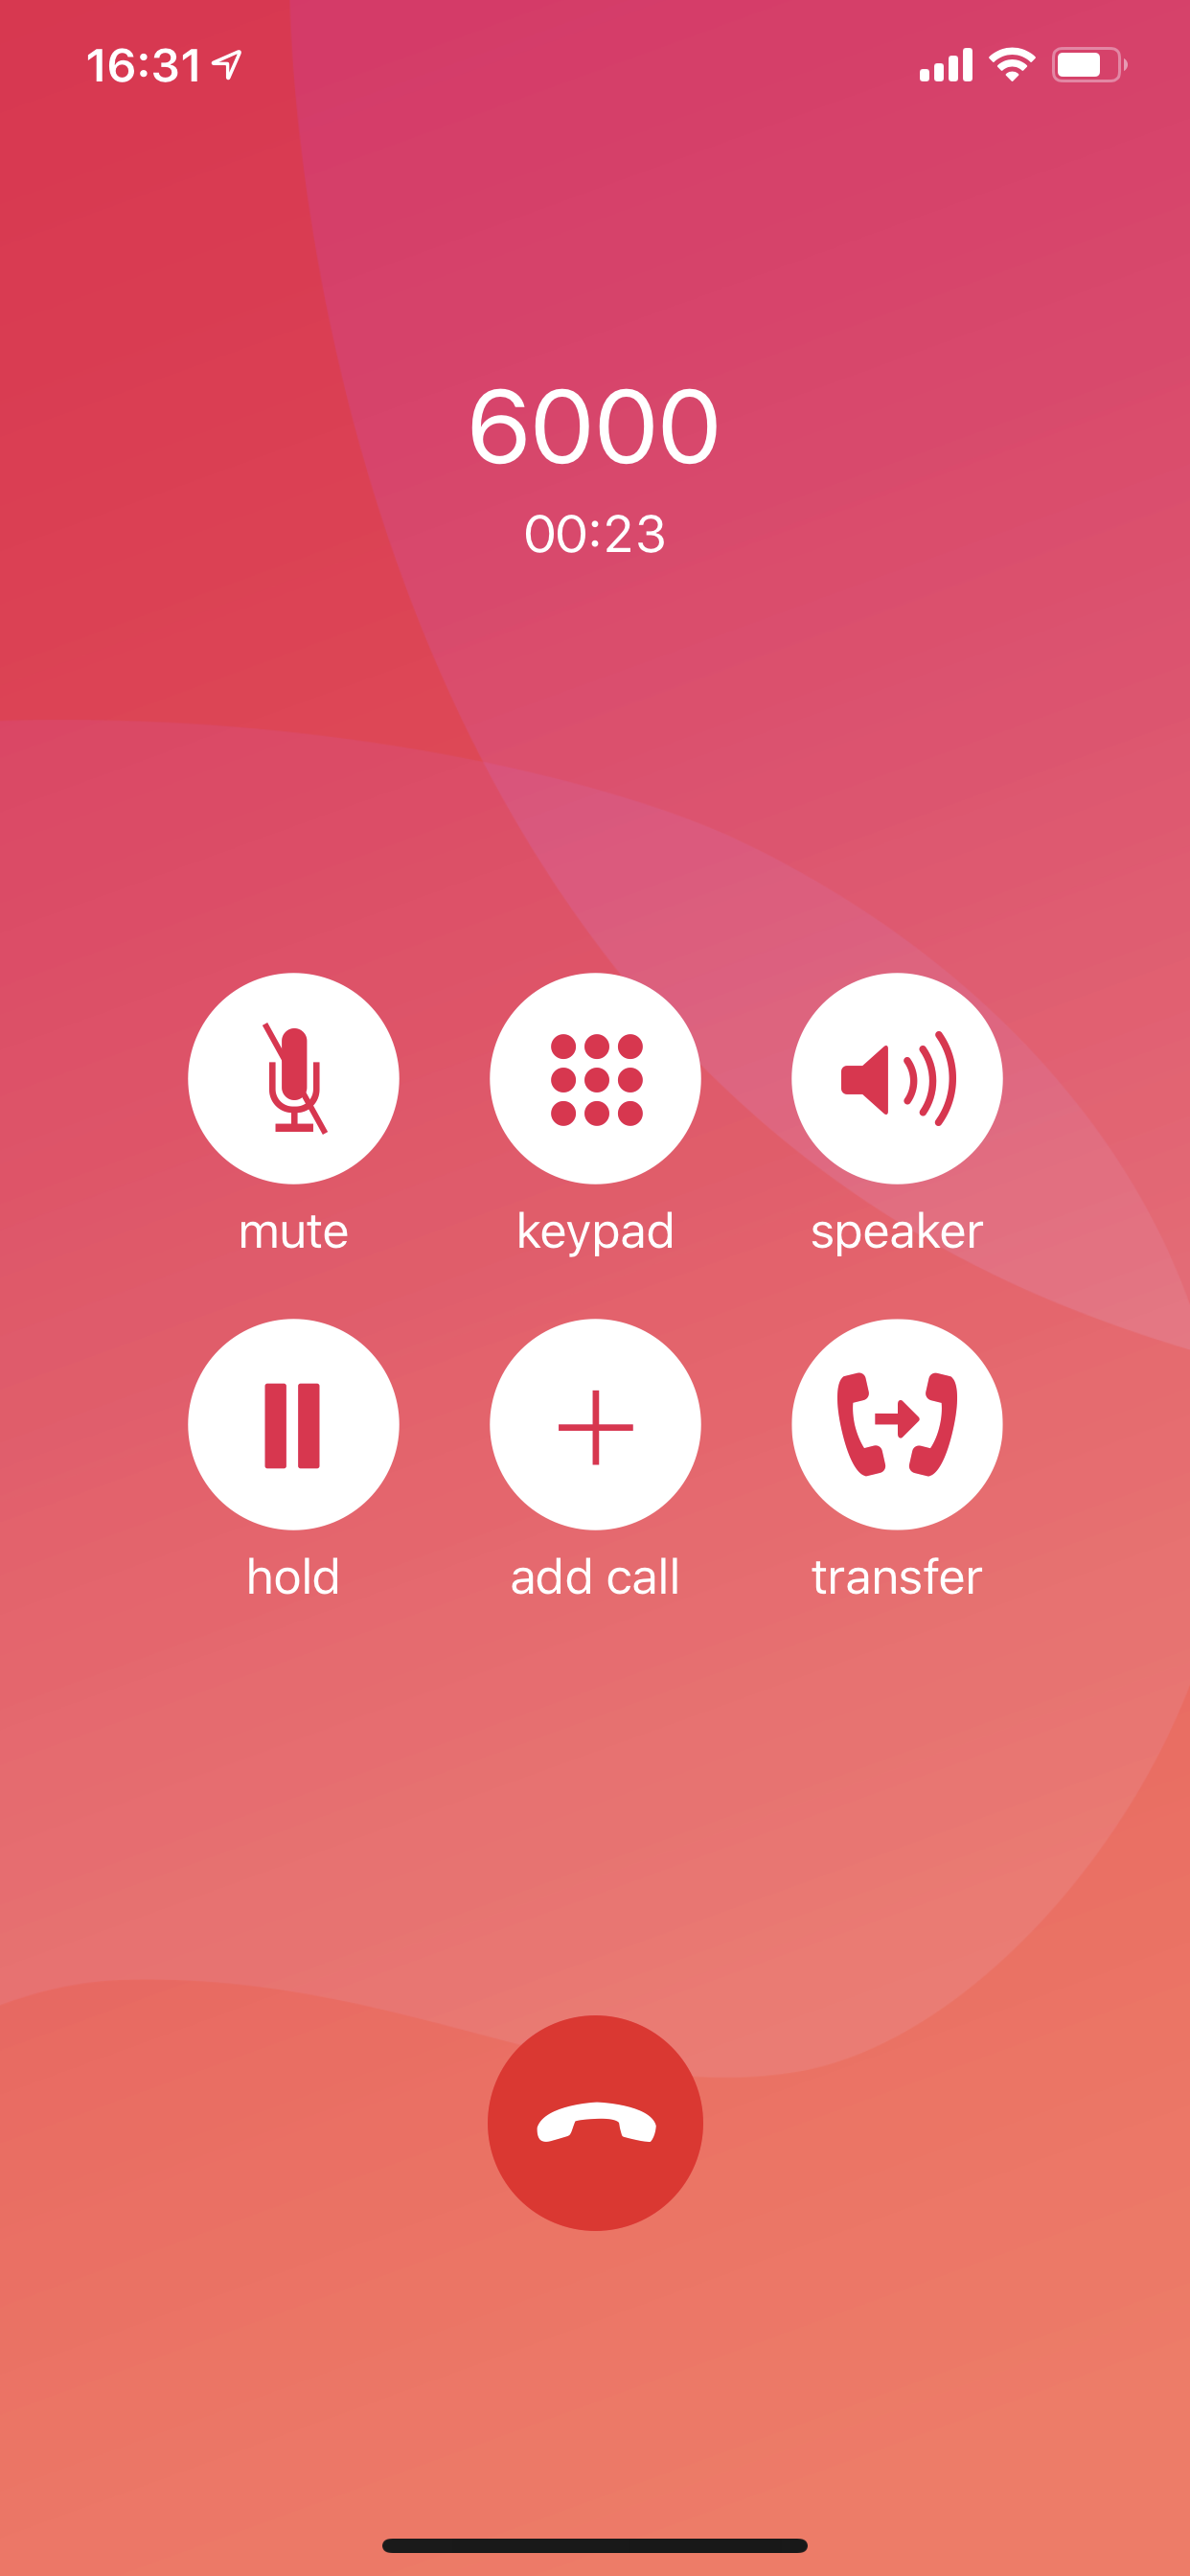 Voice calling app and phone system